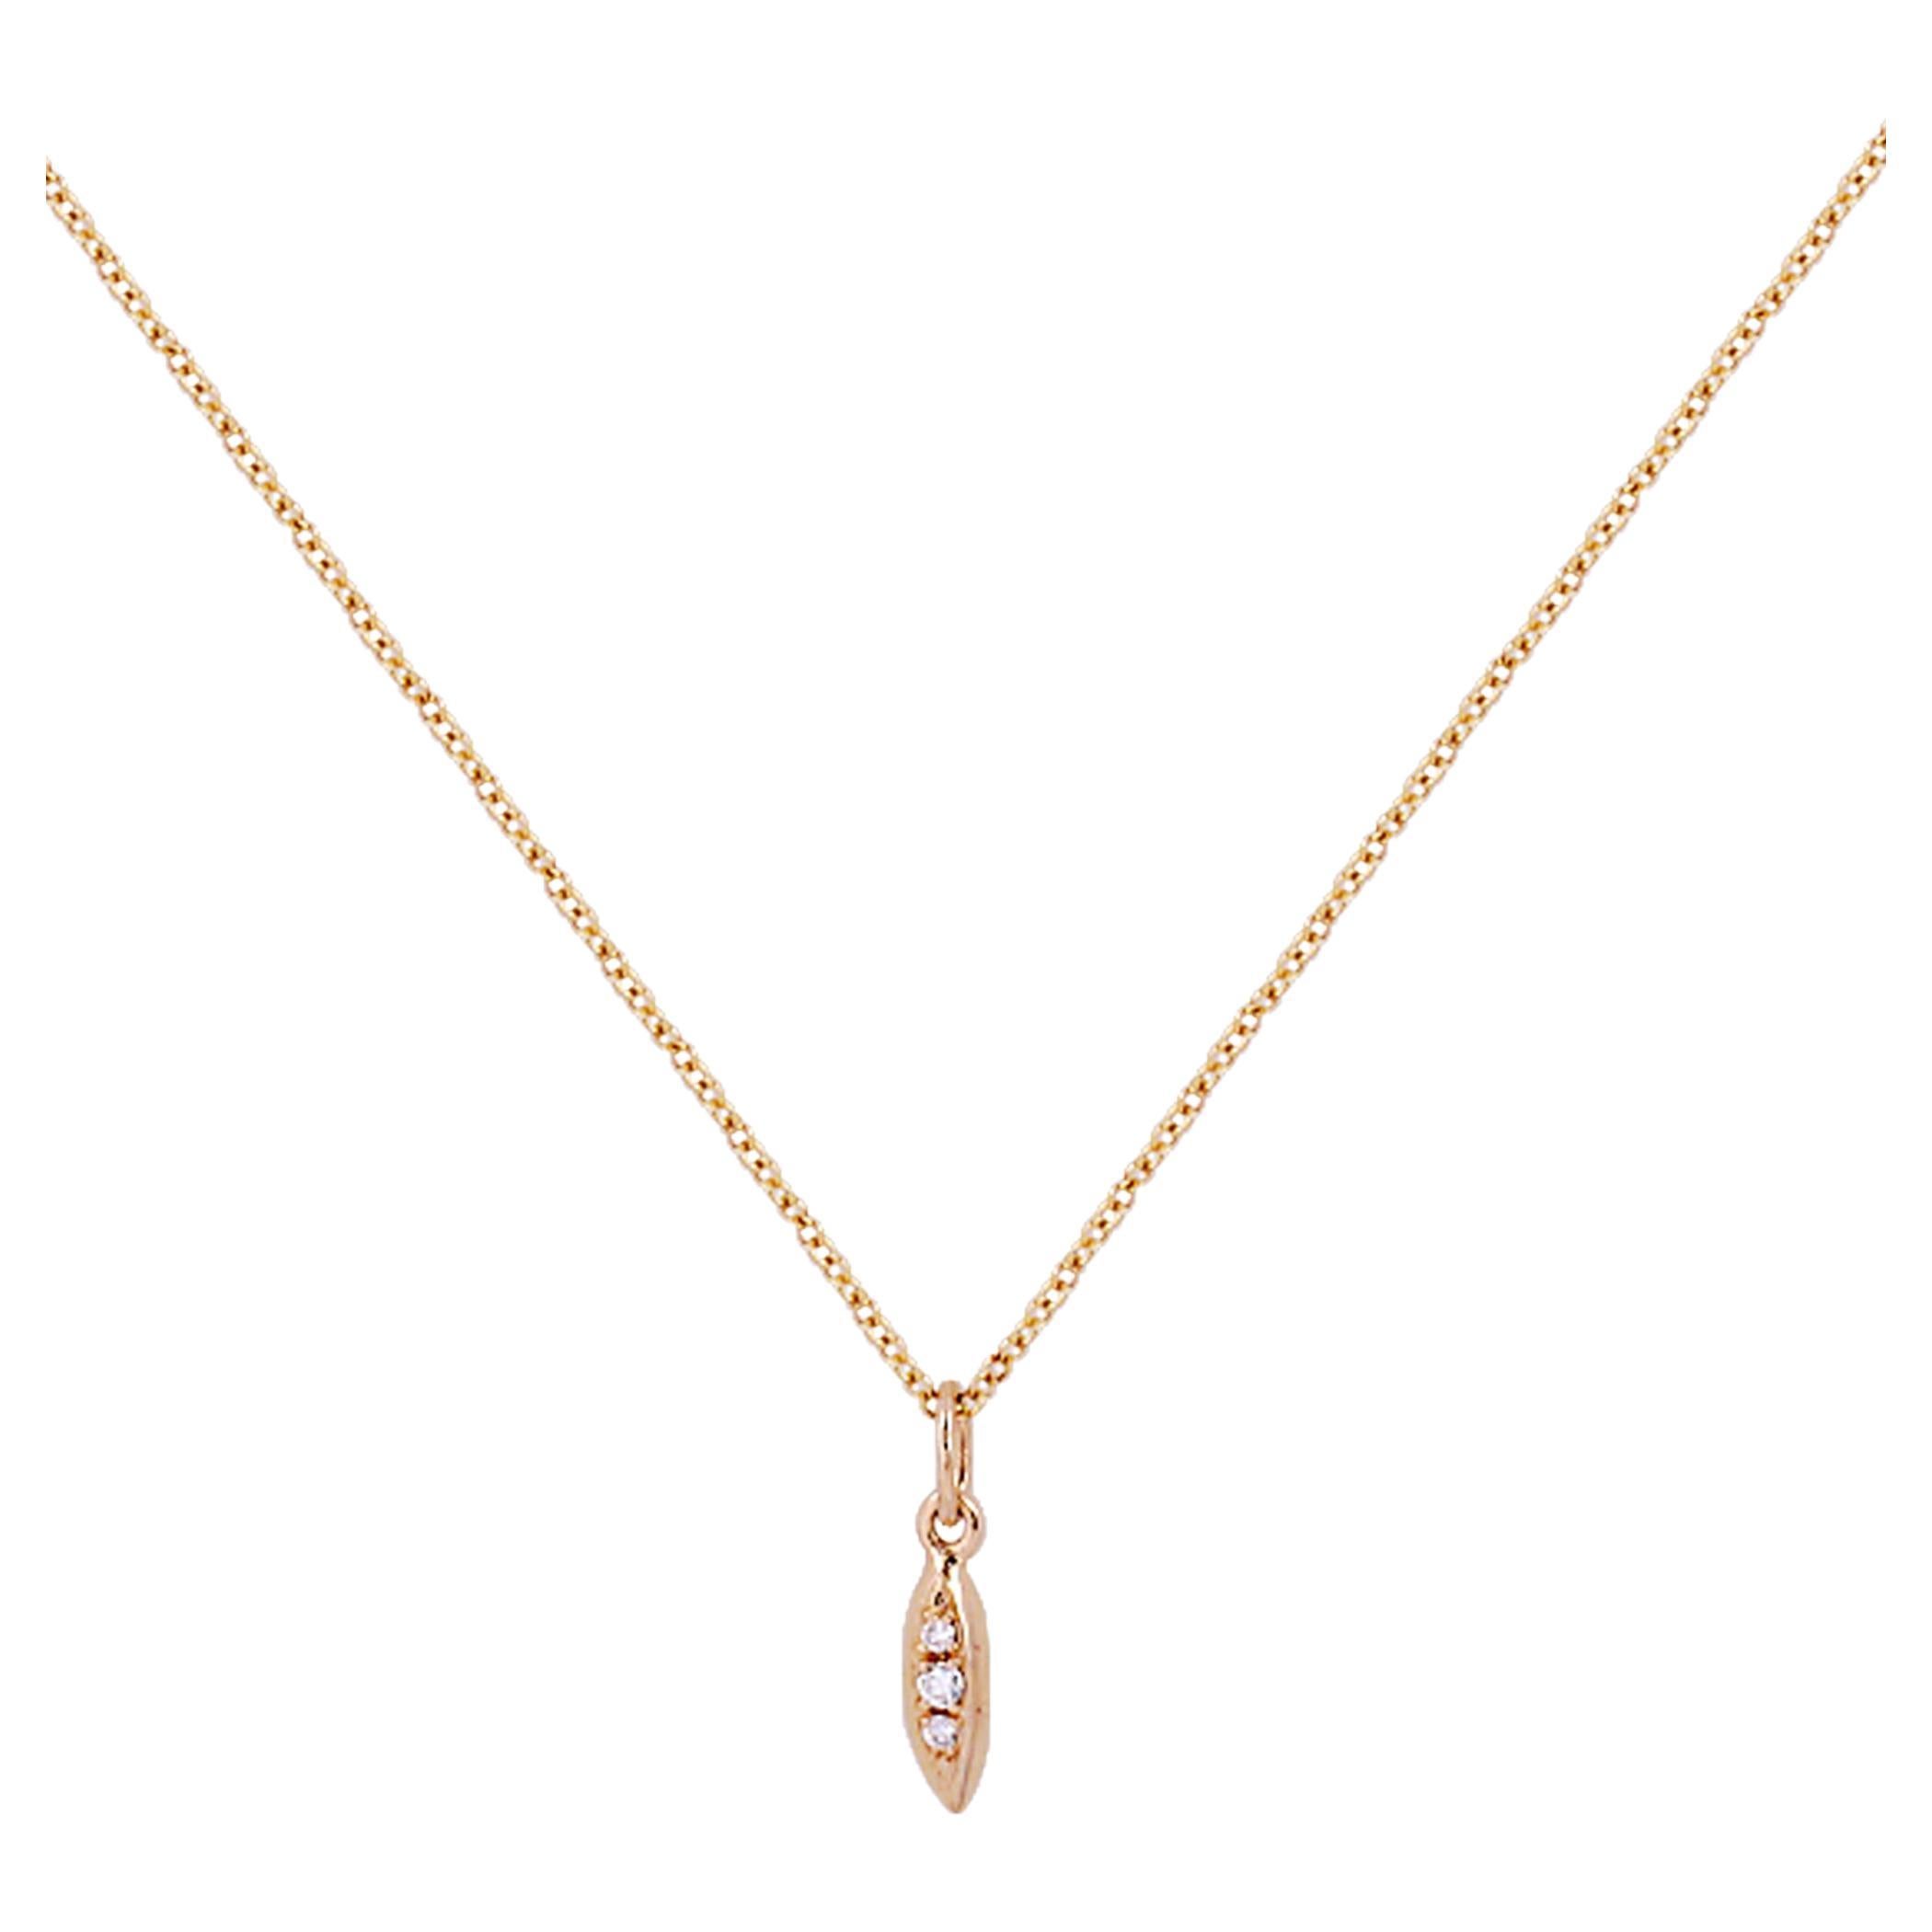 Rice Grain Diamond Necklace 14K Yellow Gold For Sale